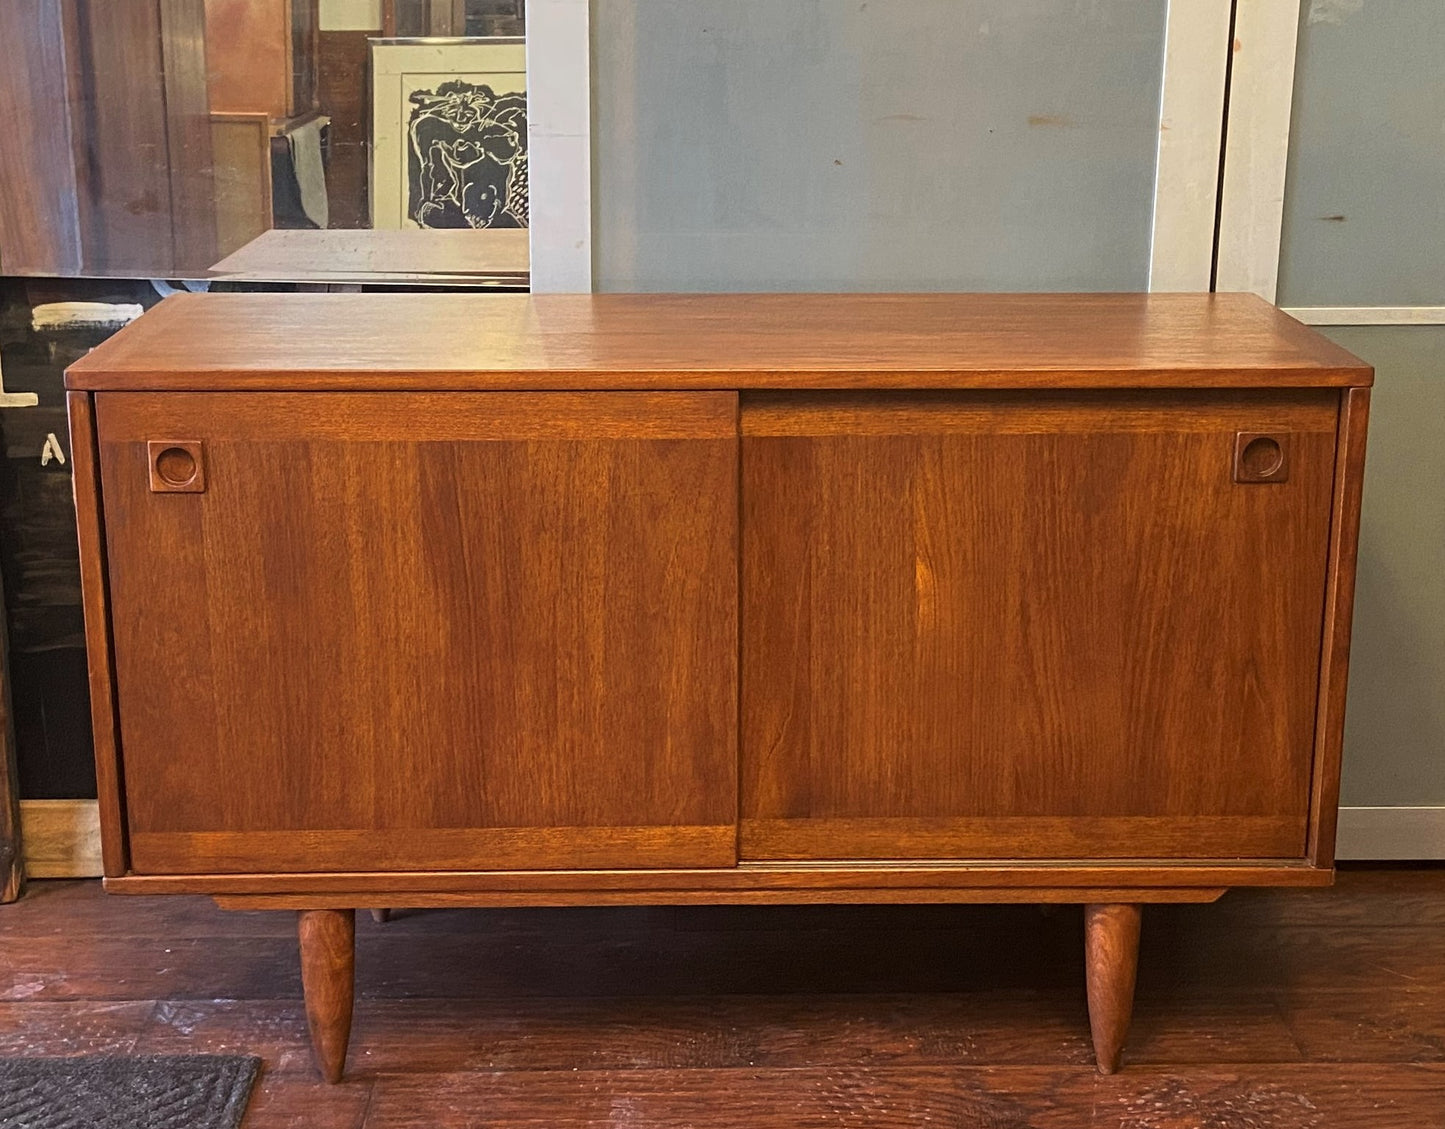 REFINISHED Swedish MCM Teak Sideboard with Finished Back, Compact 47", Perfect